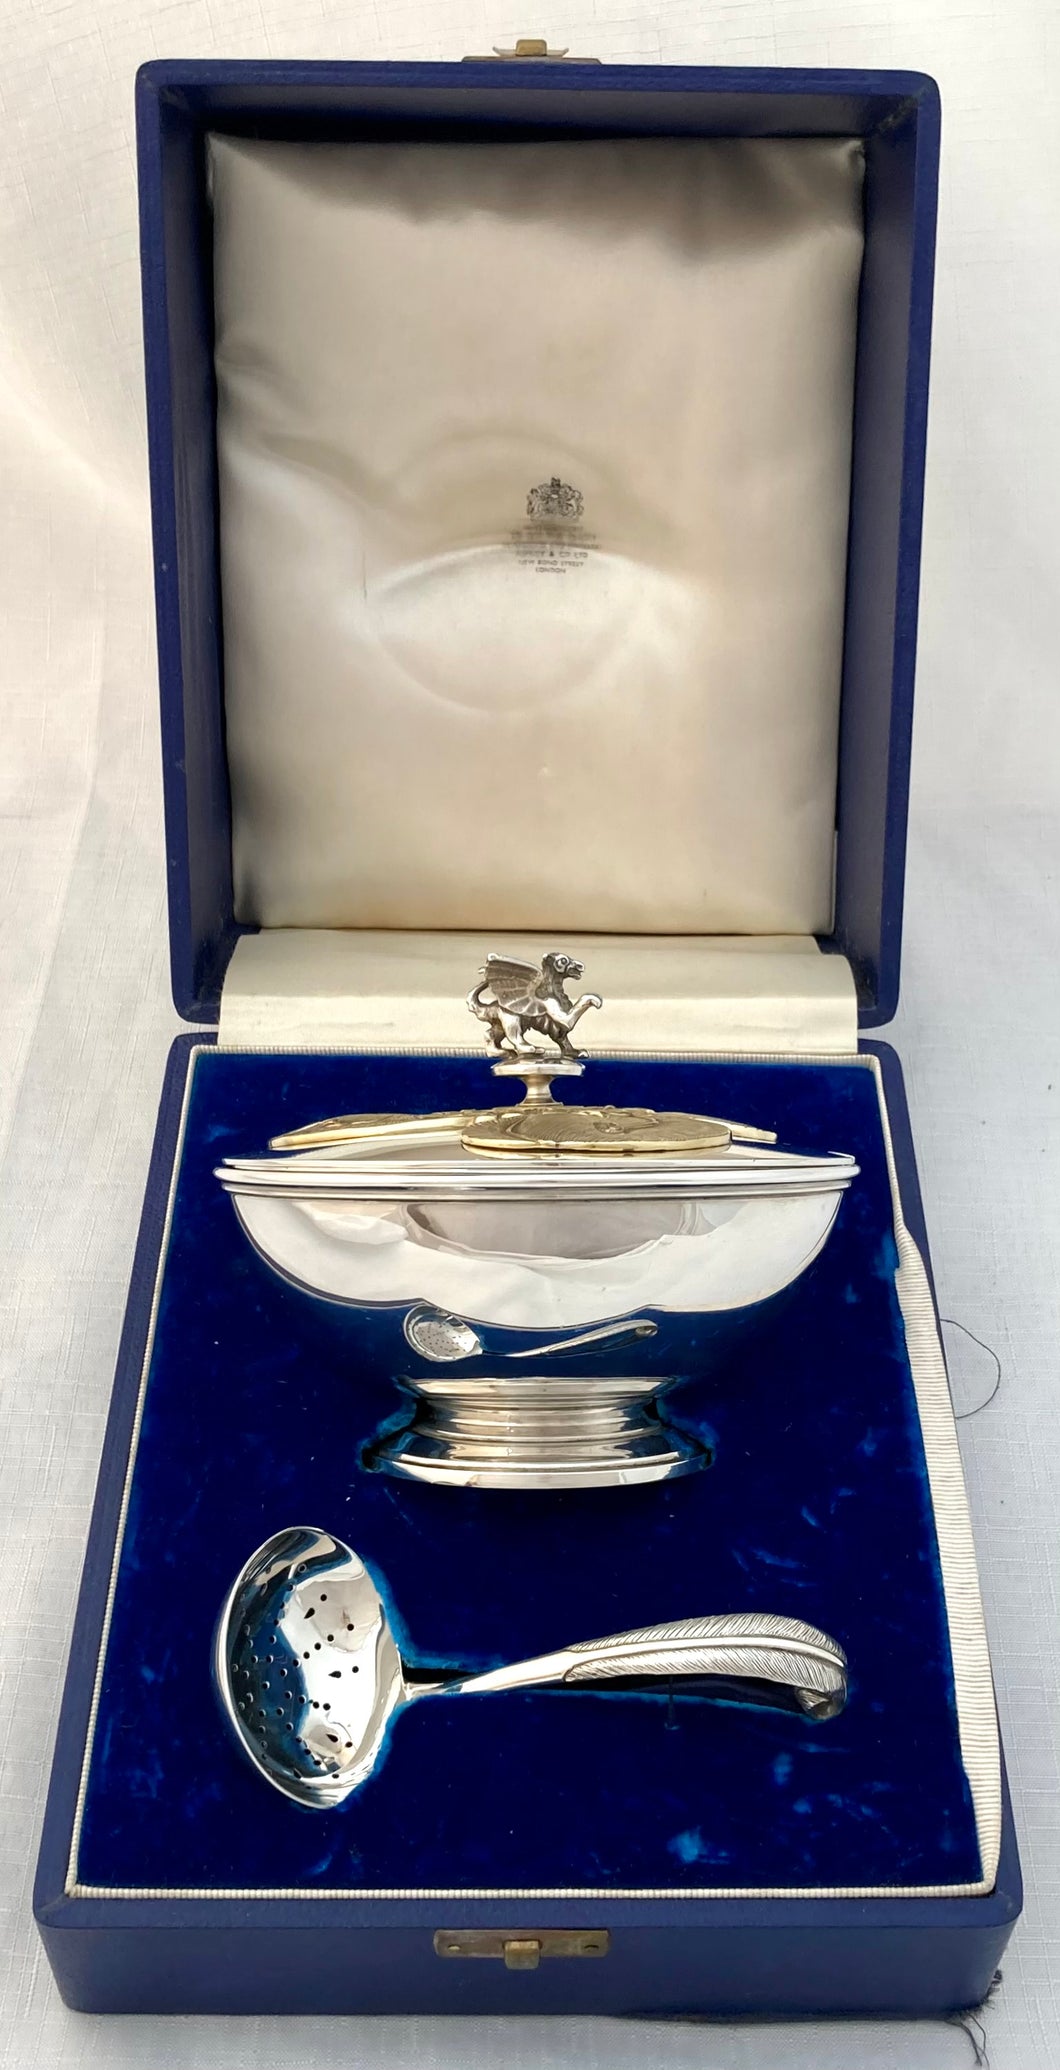 Elizabeth II Silver Bowl & Sifter Ladle for the Investiture of Charles, Prince of Wales. London 1968 Asprey & Co. Ltd. 17.4 troy ounces.